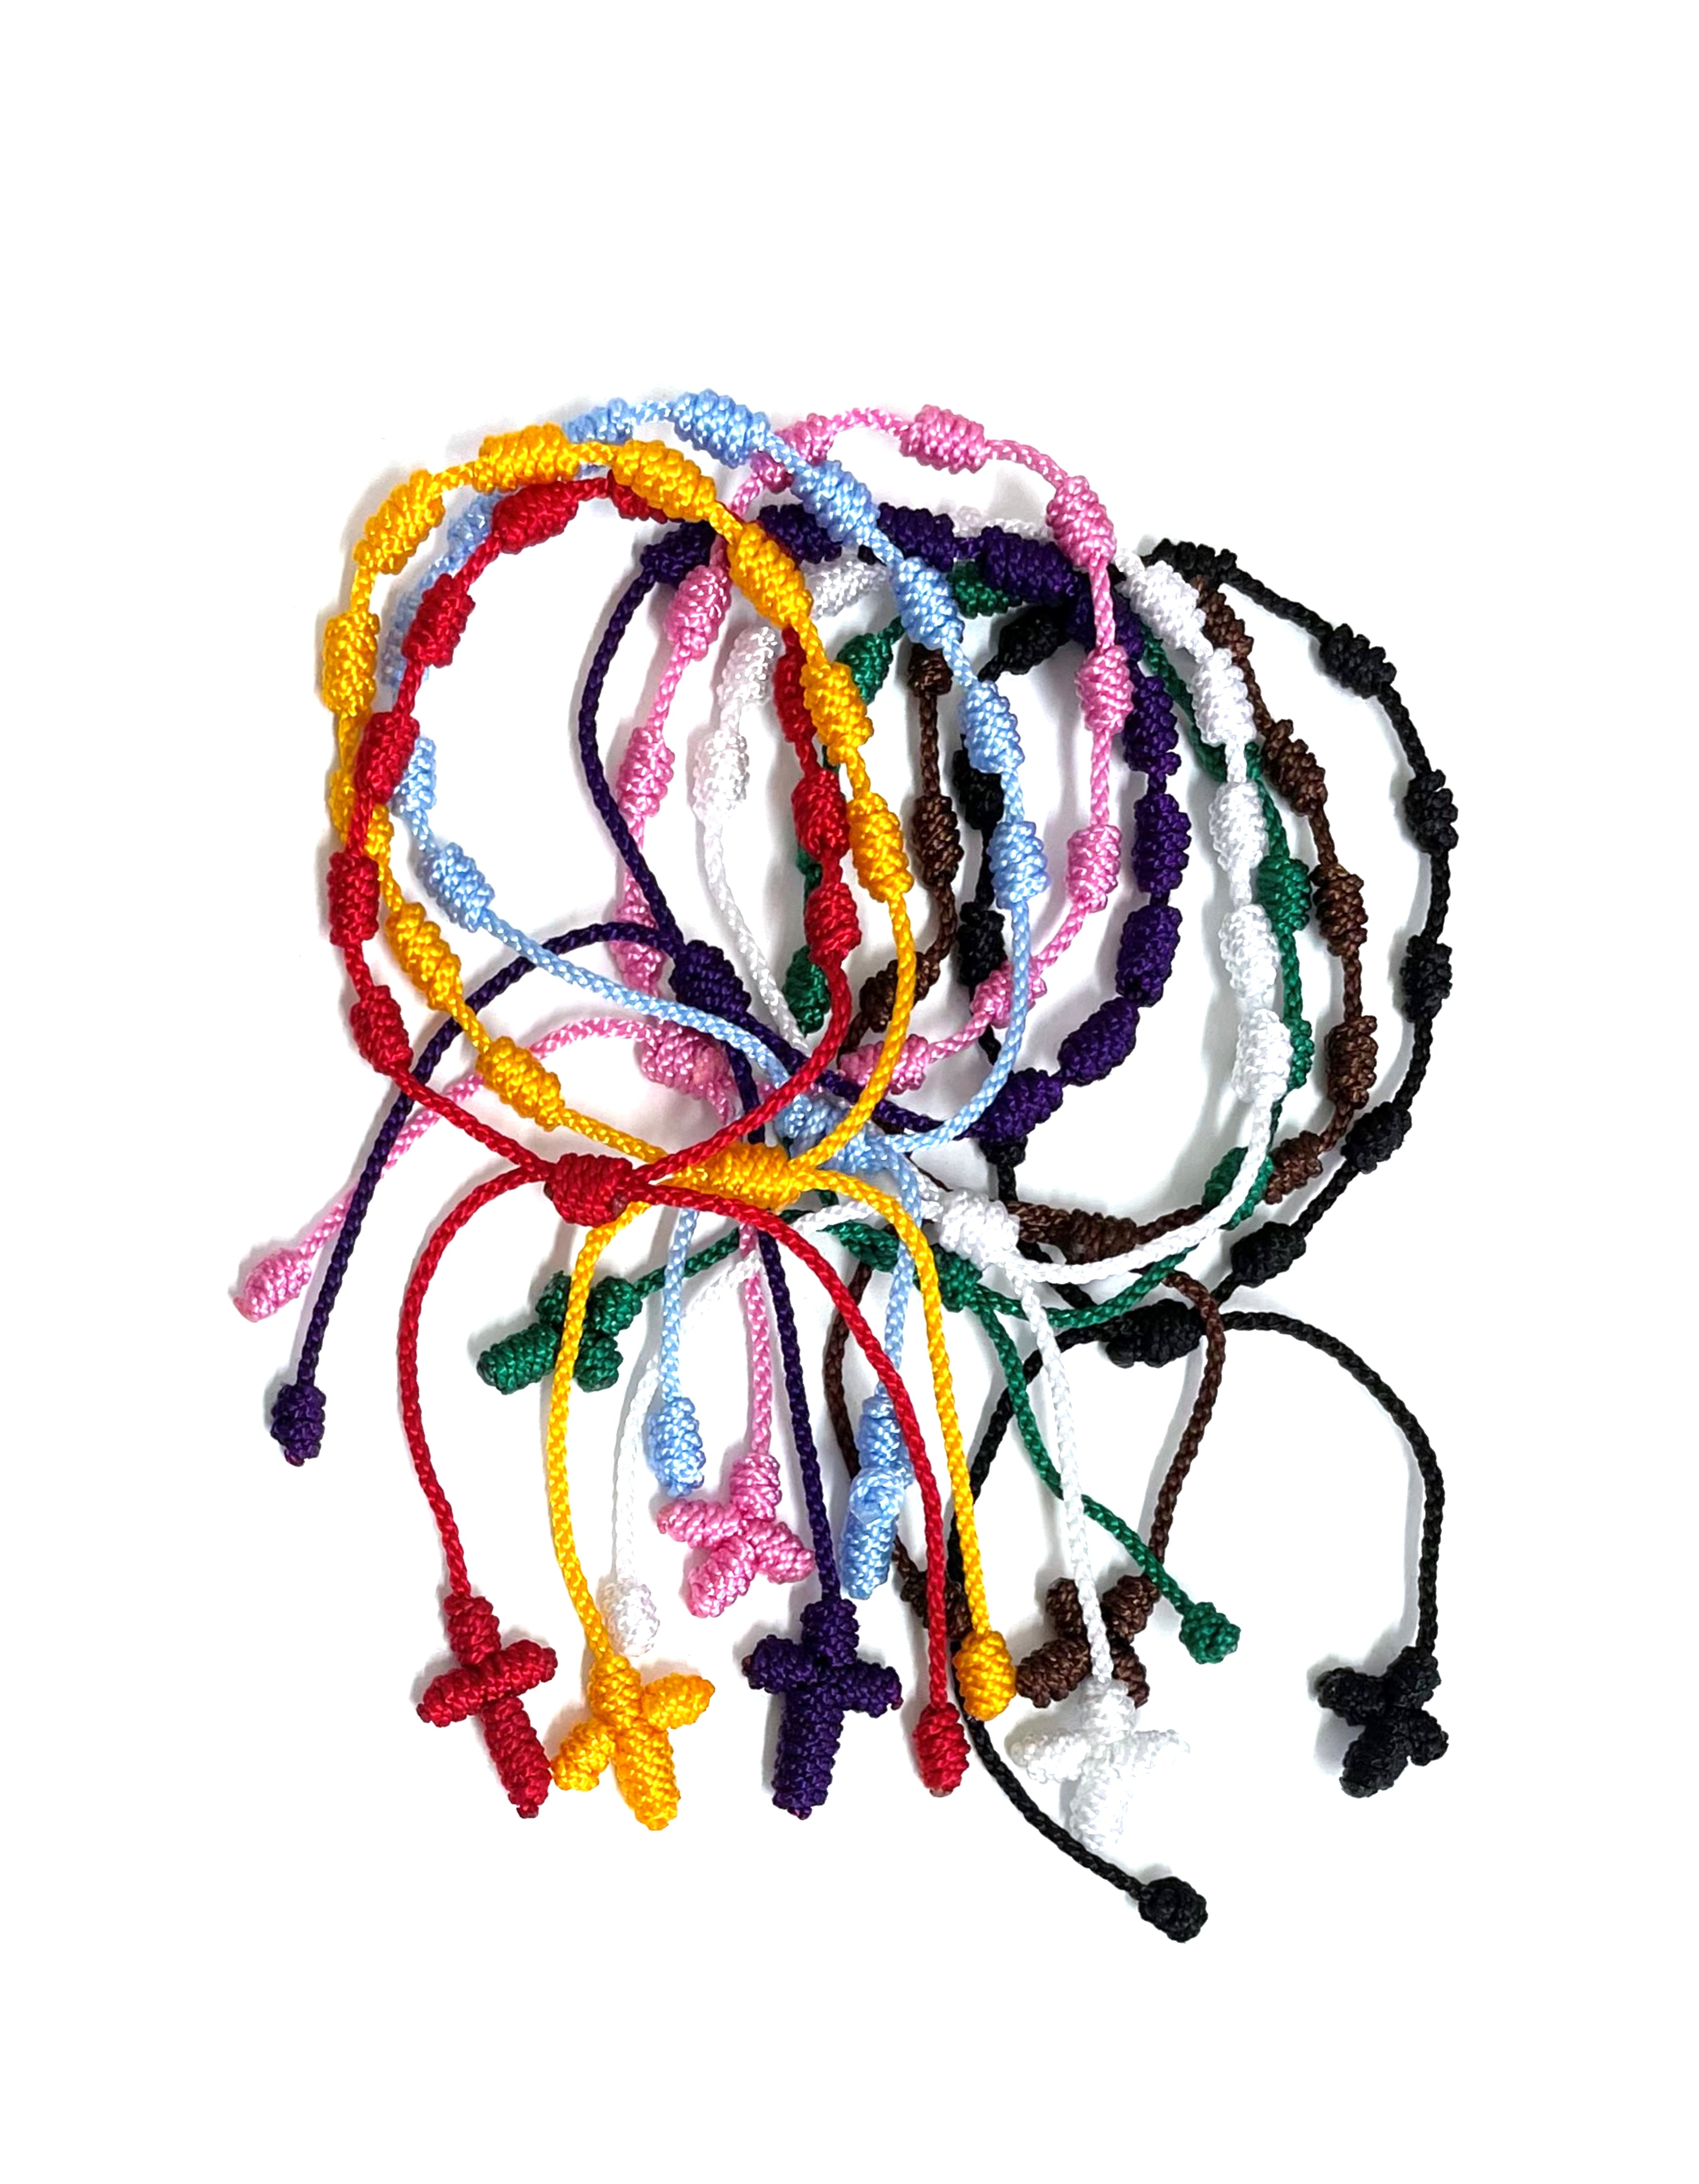 Decade bracelet knotted with strings in bright colors